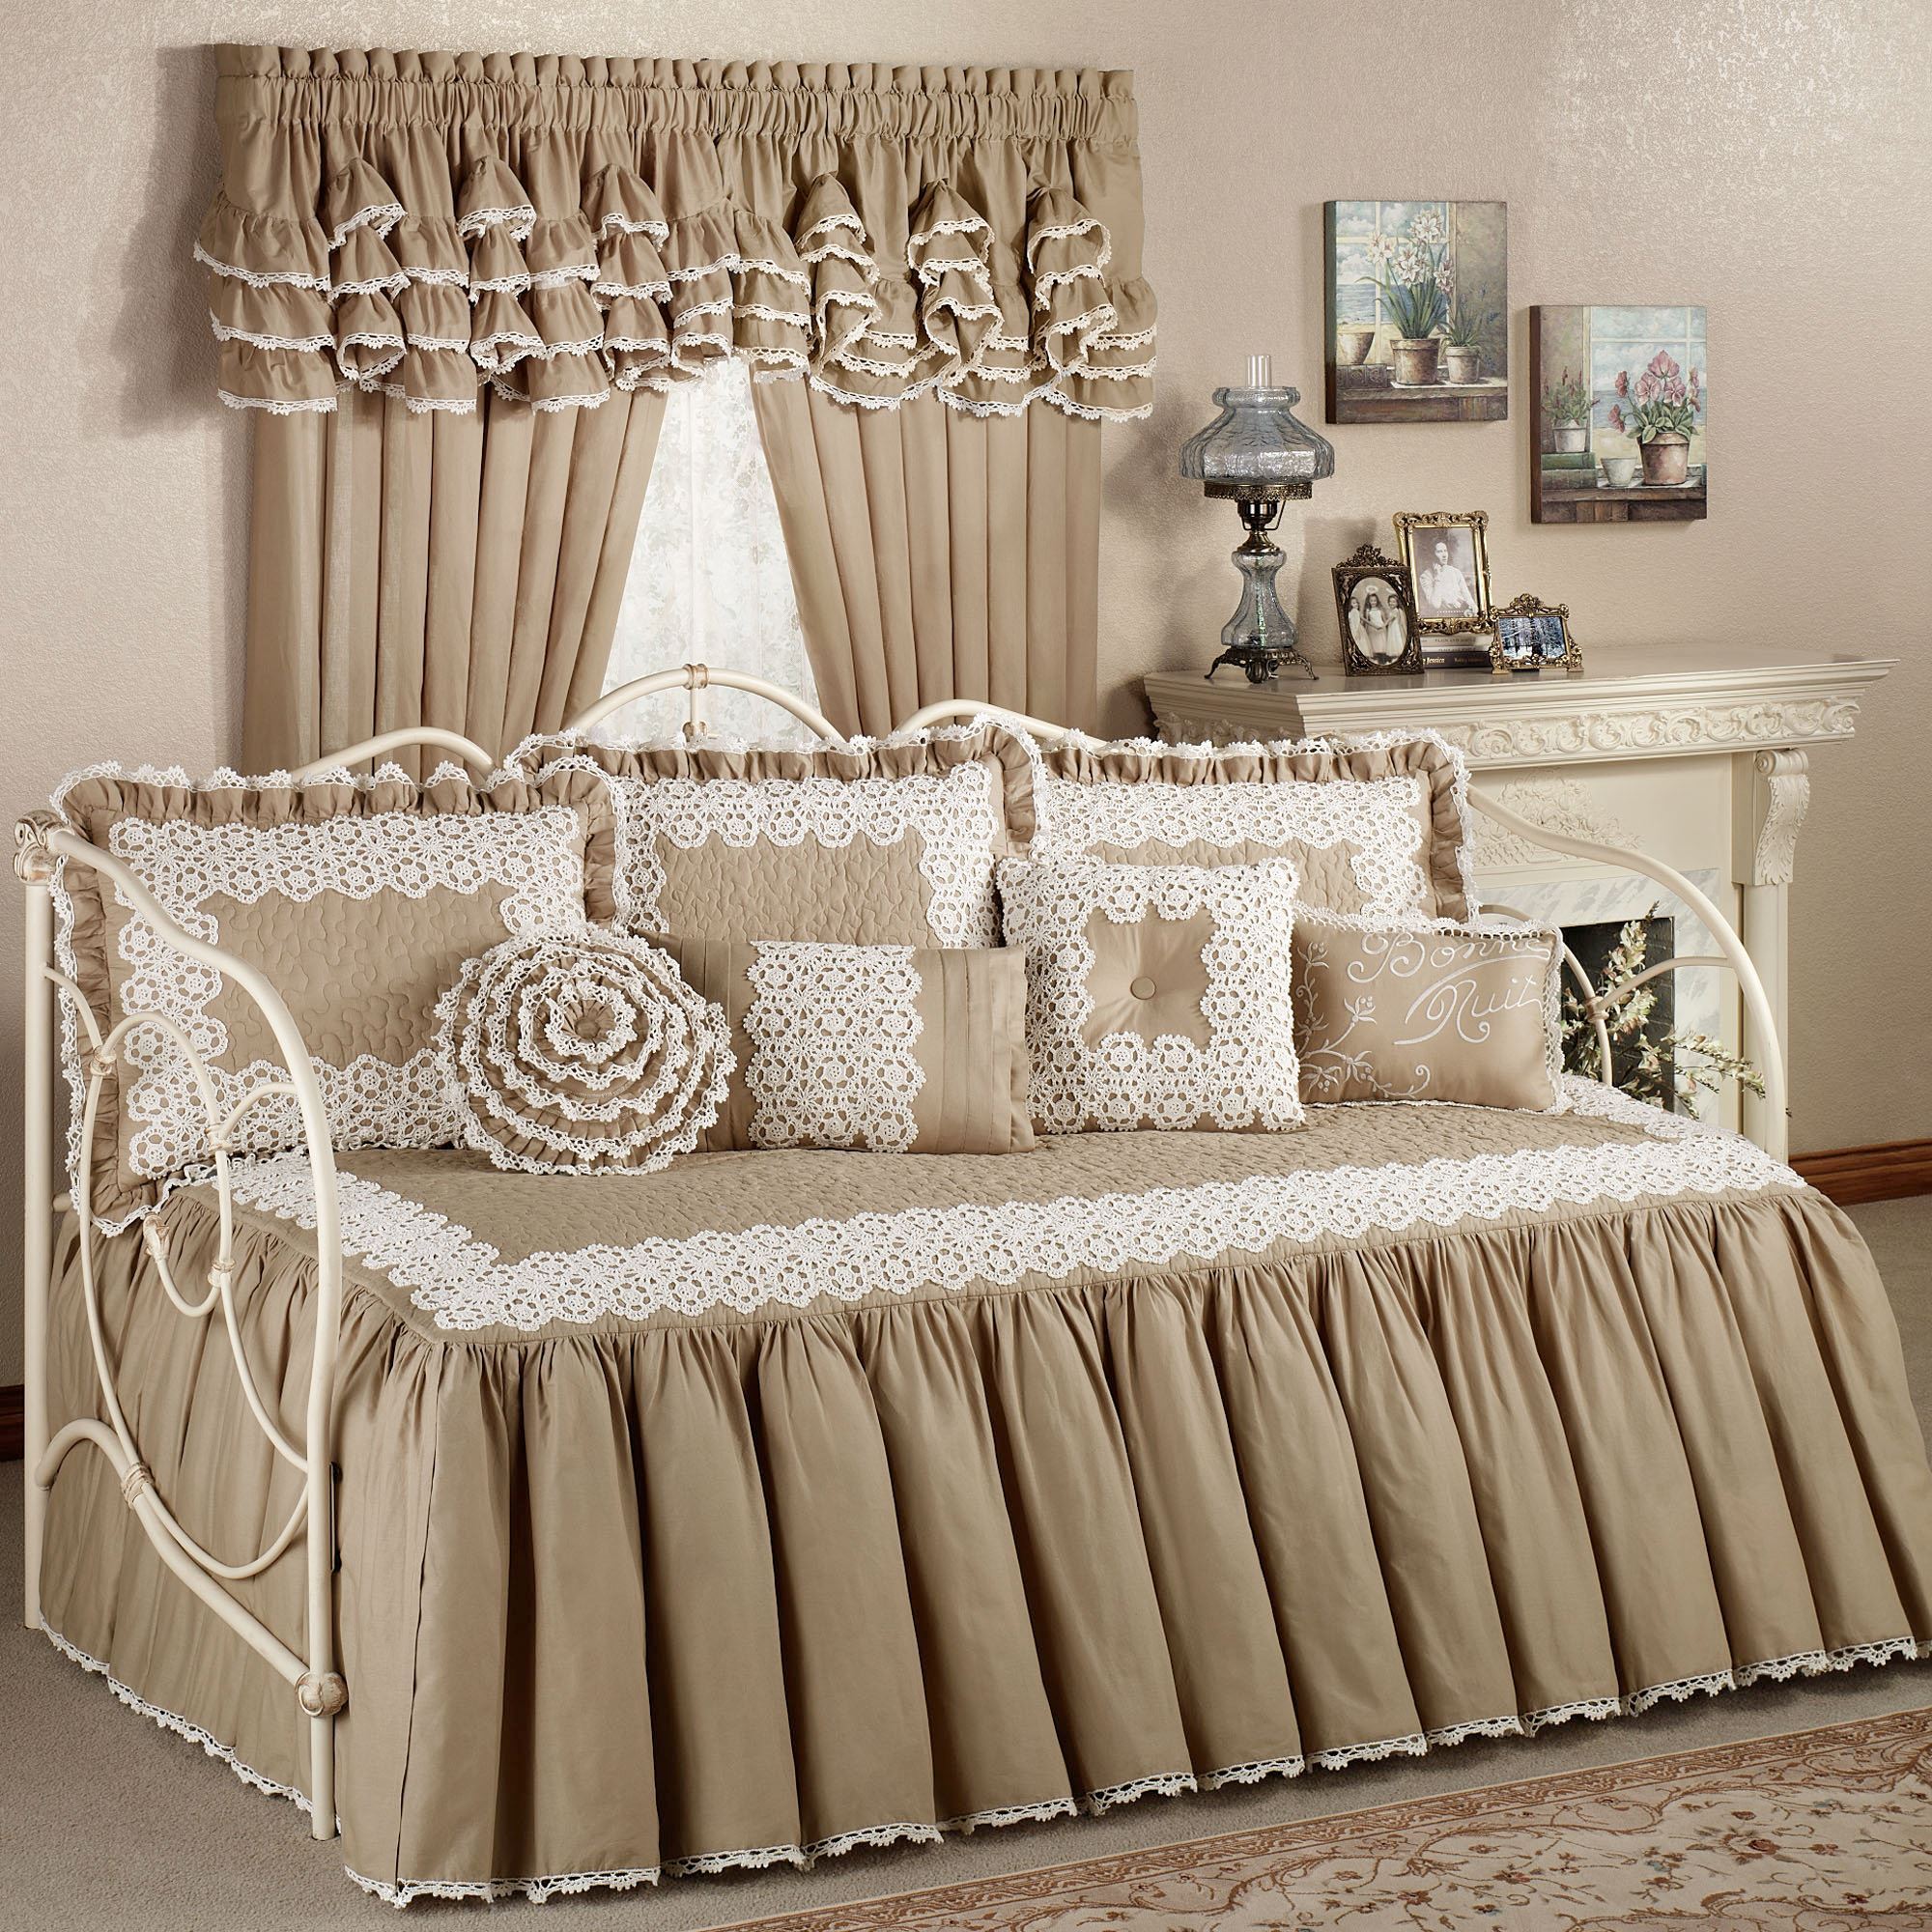 daybed set bed bath beyond photo - 10